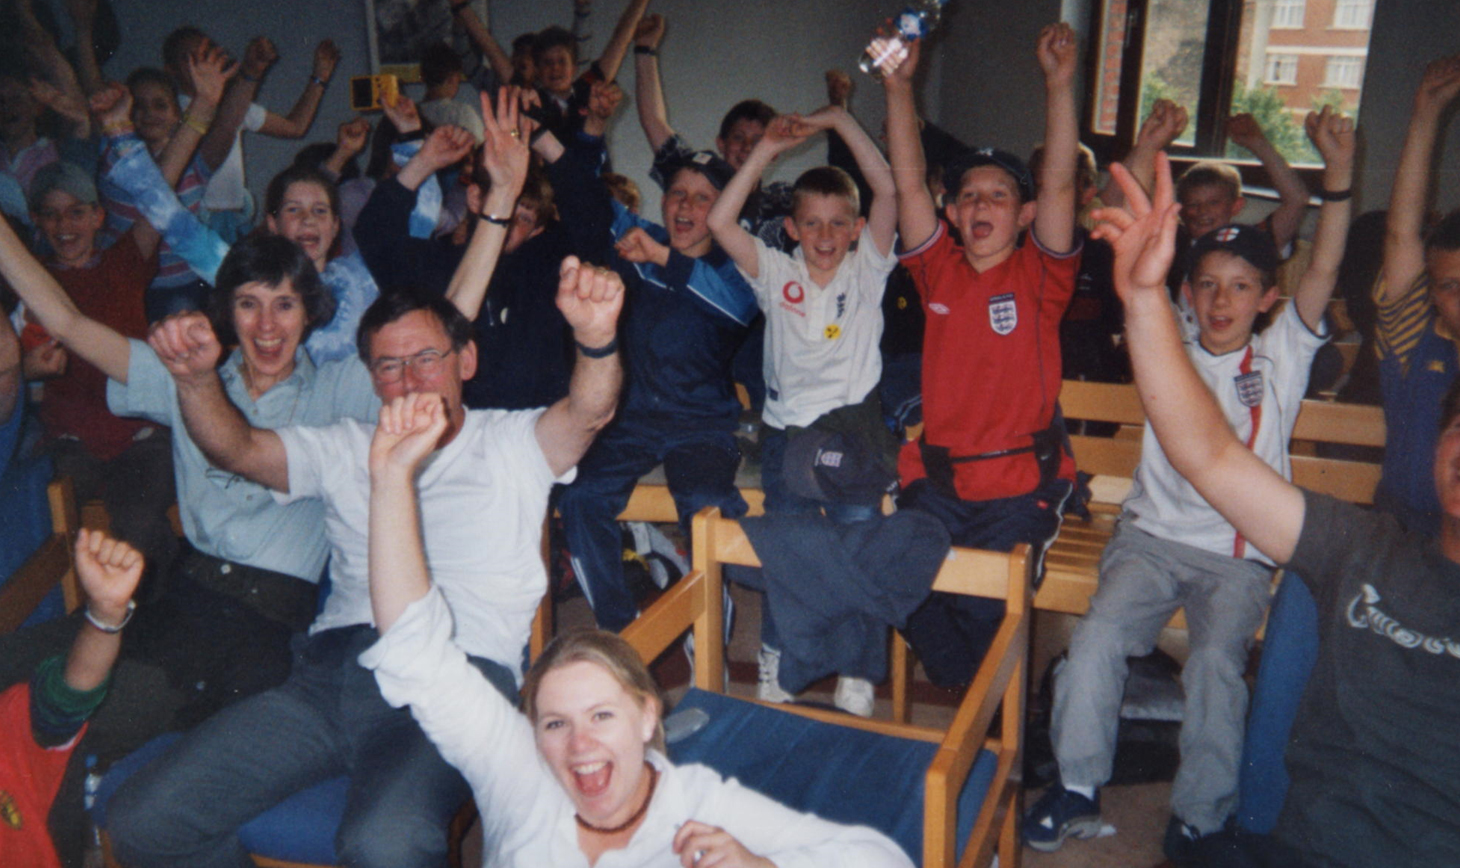 A very happy bunch on an RGS trip to Brussels in 2002